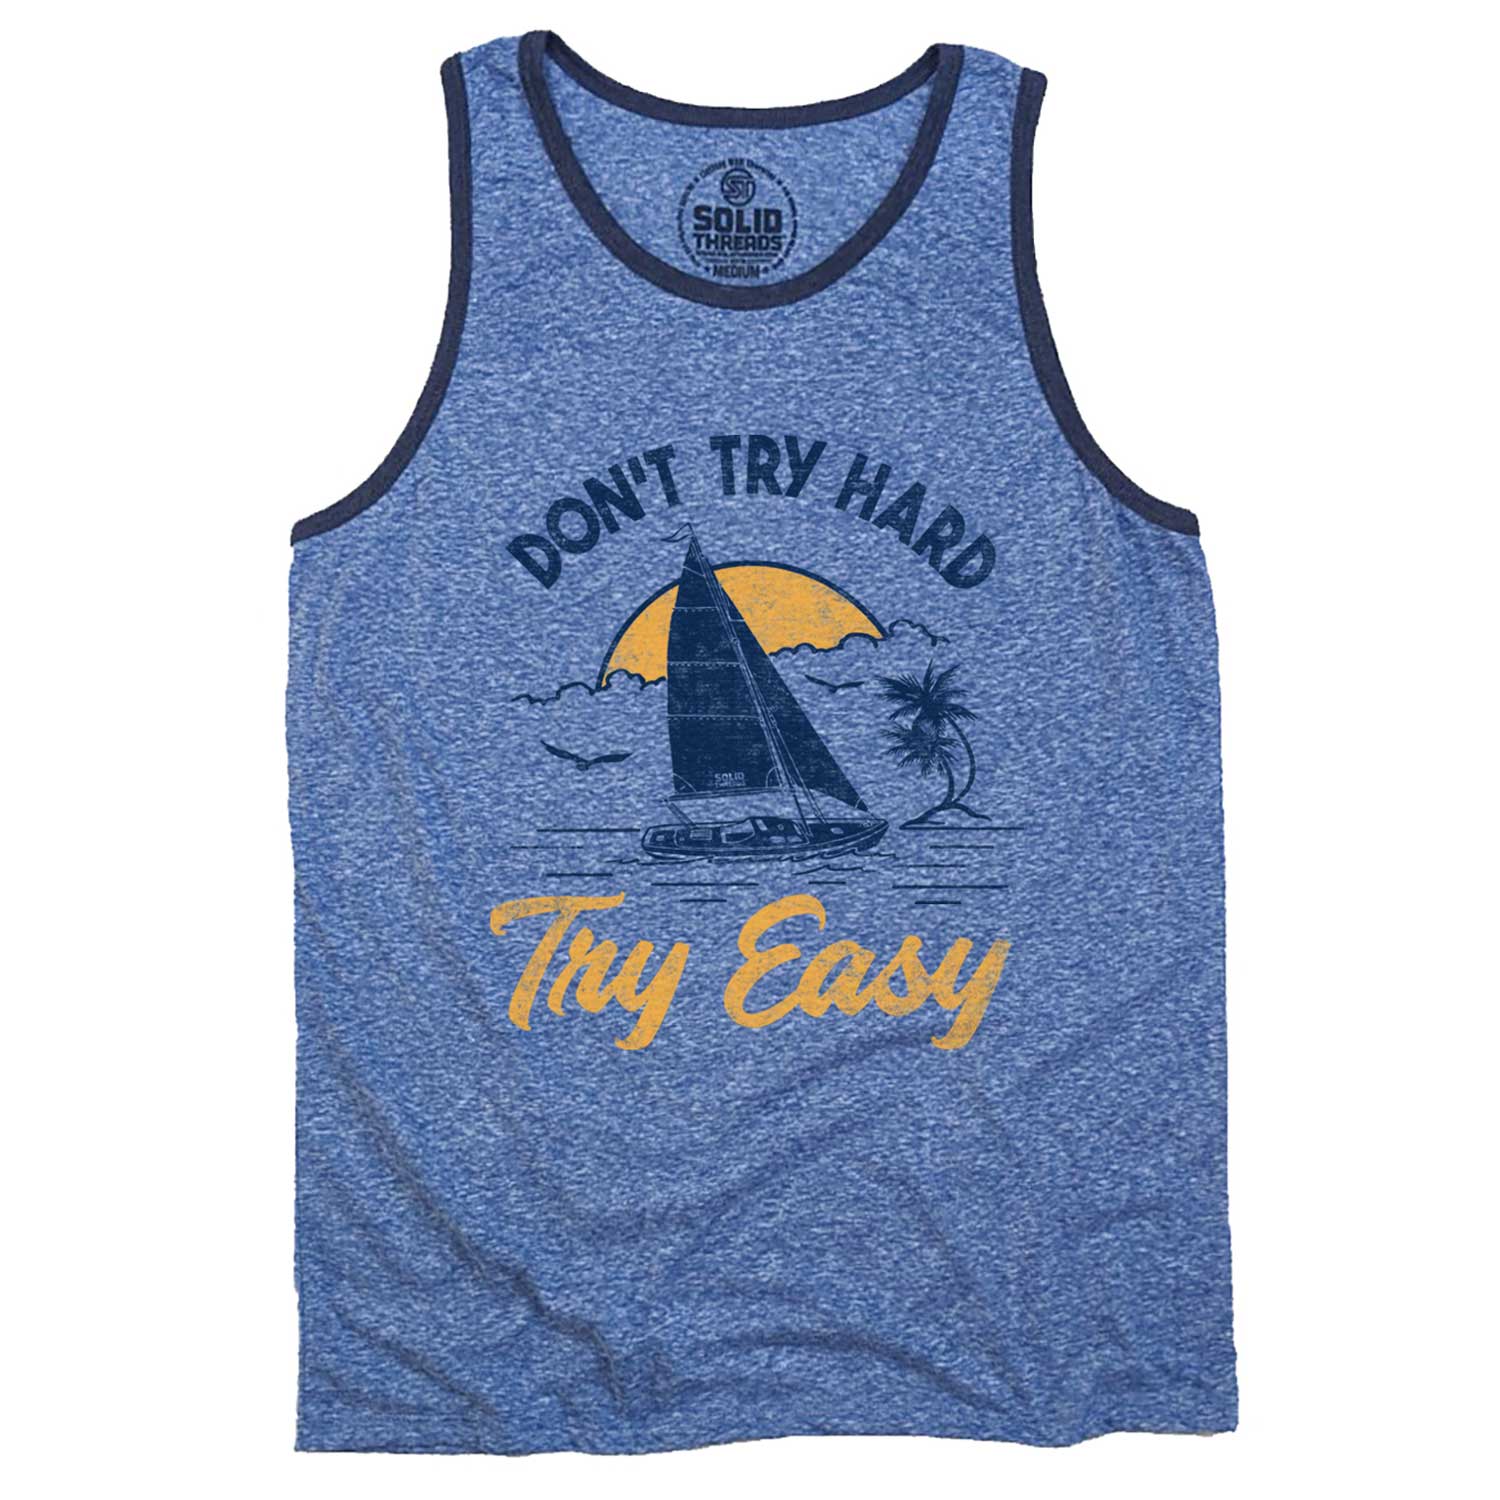 Men's Don't Try Hard Try Easy Vintage Graphic Tank Top | Cool Sailboat T-shirt | Solid Threads